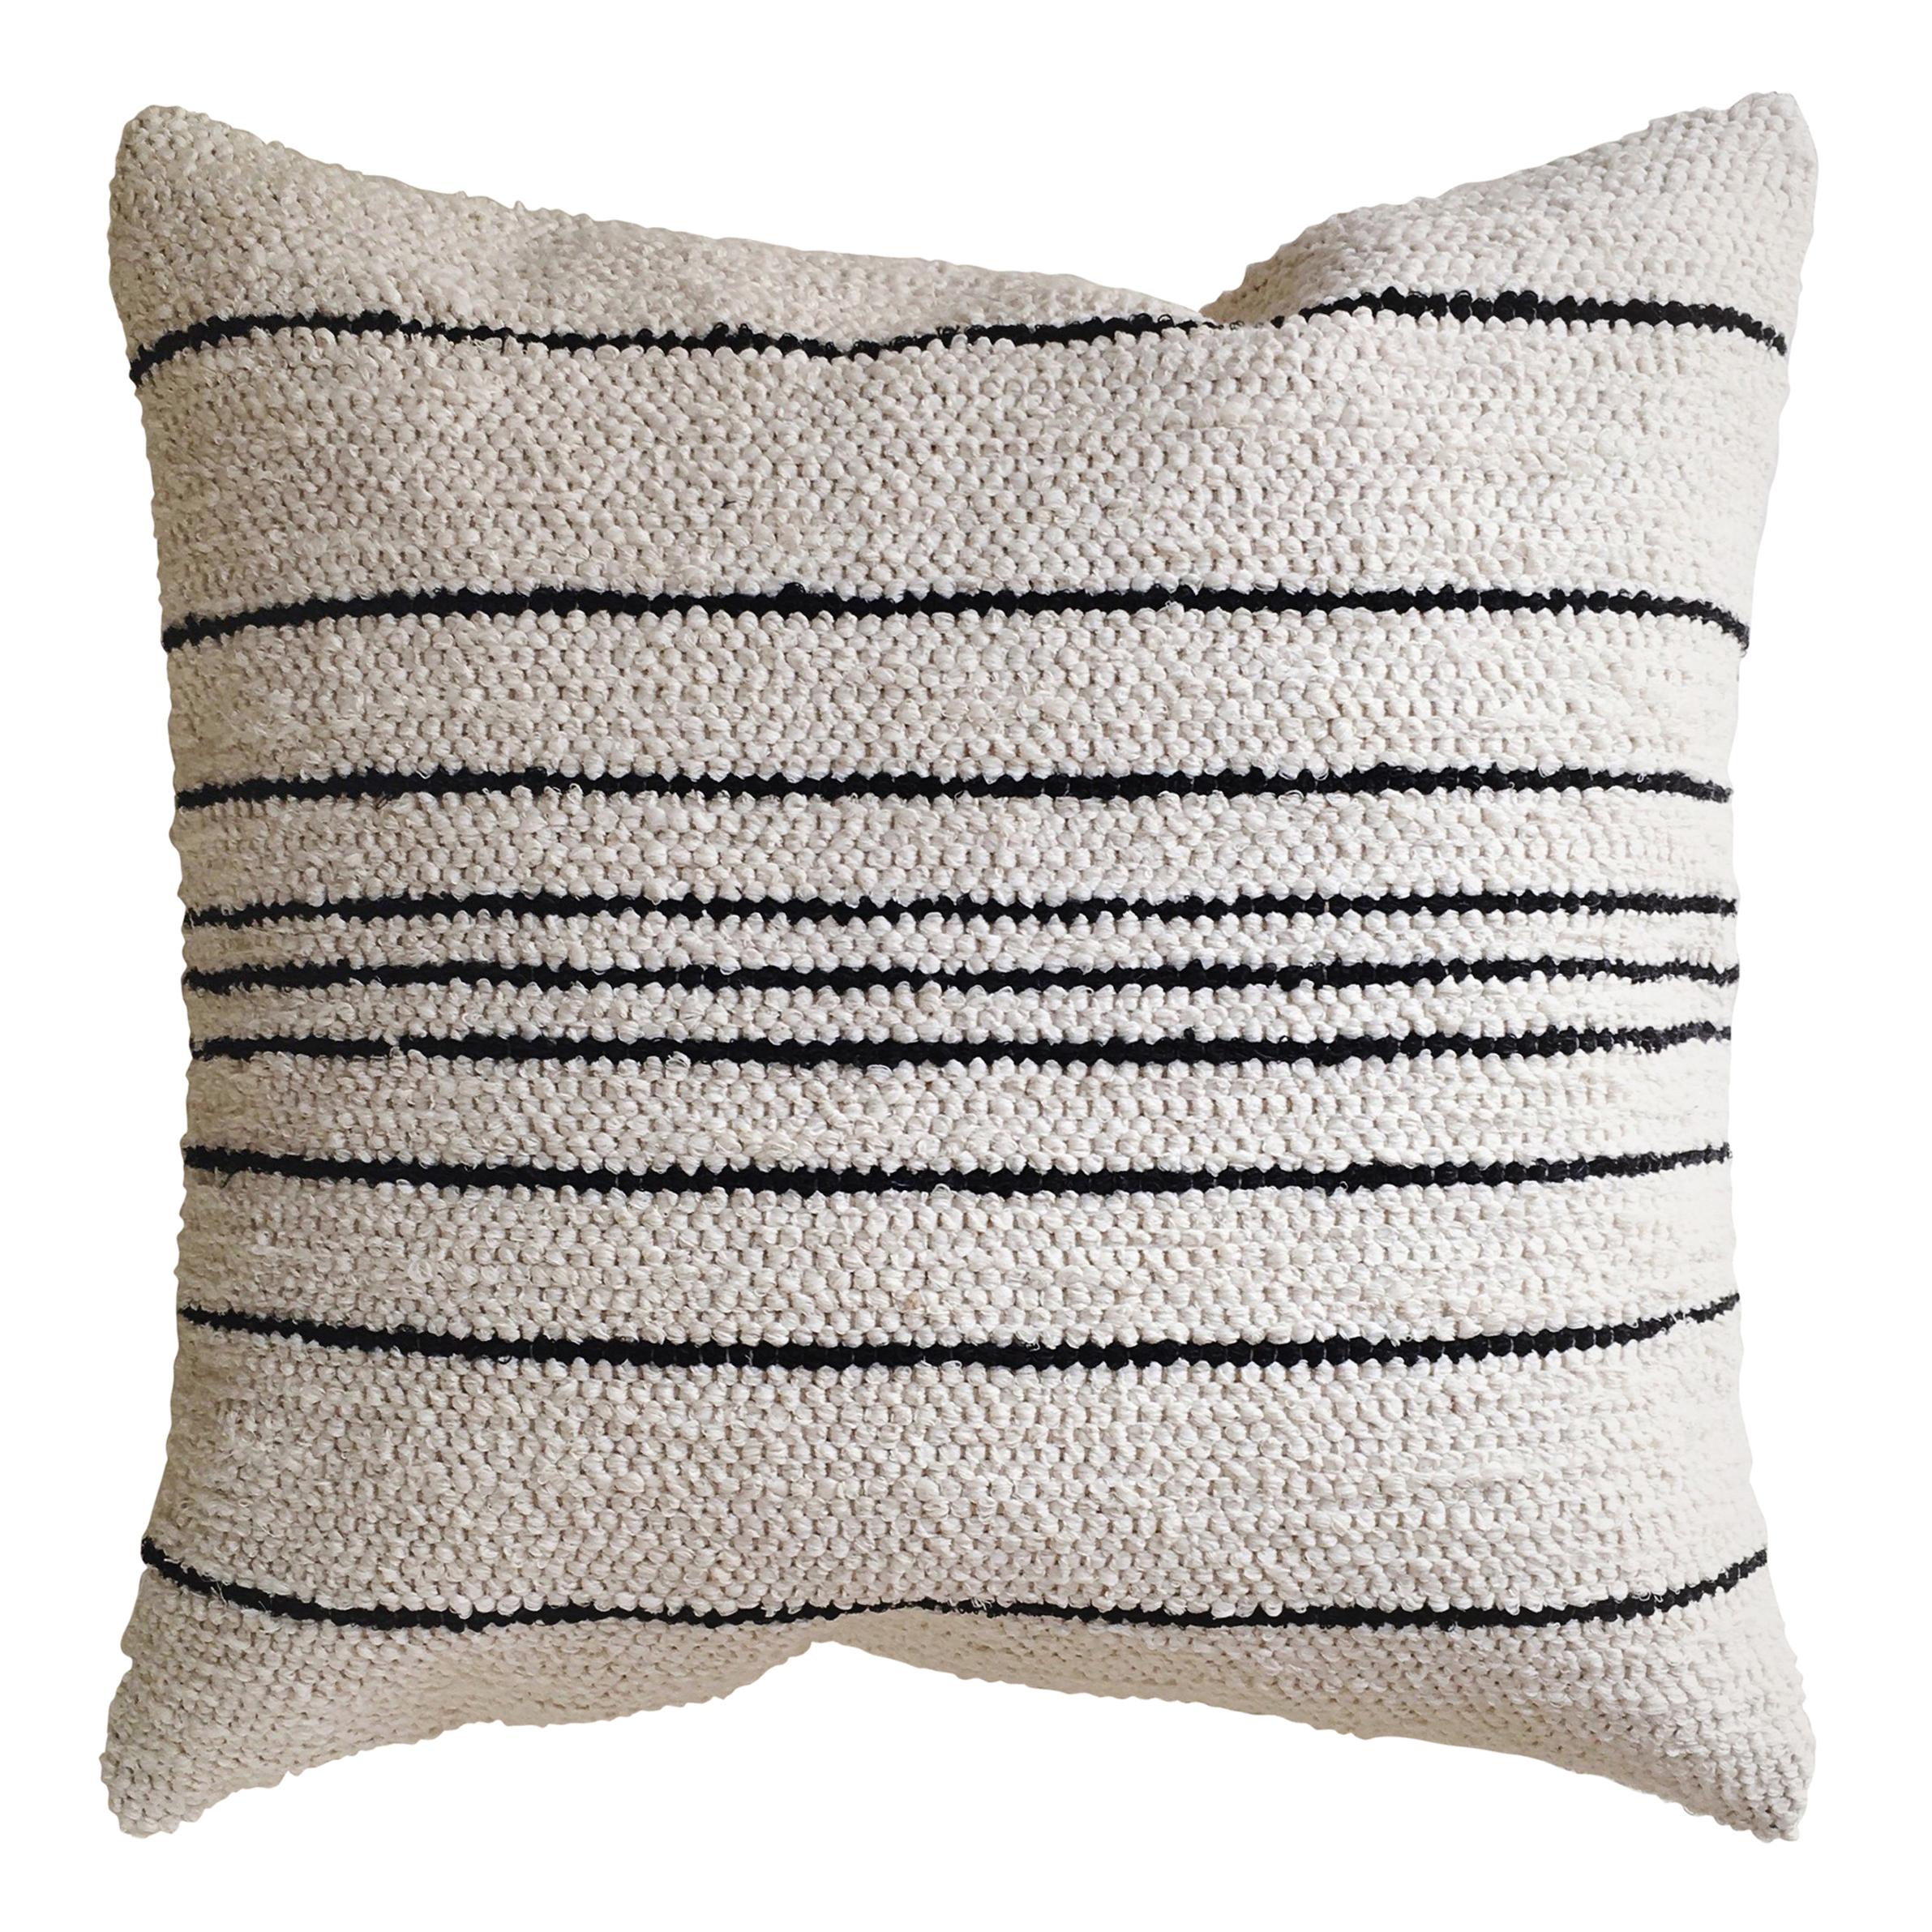 Handwoven Cotton Thin Stripe Throw Pillow in Black and Natural, in Stock